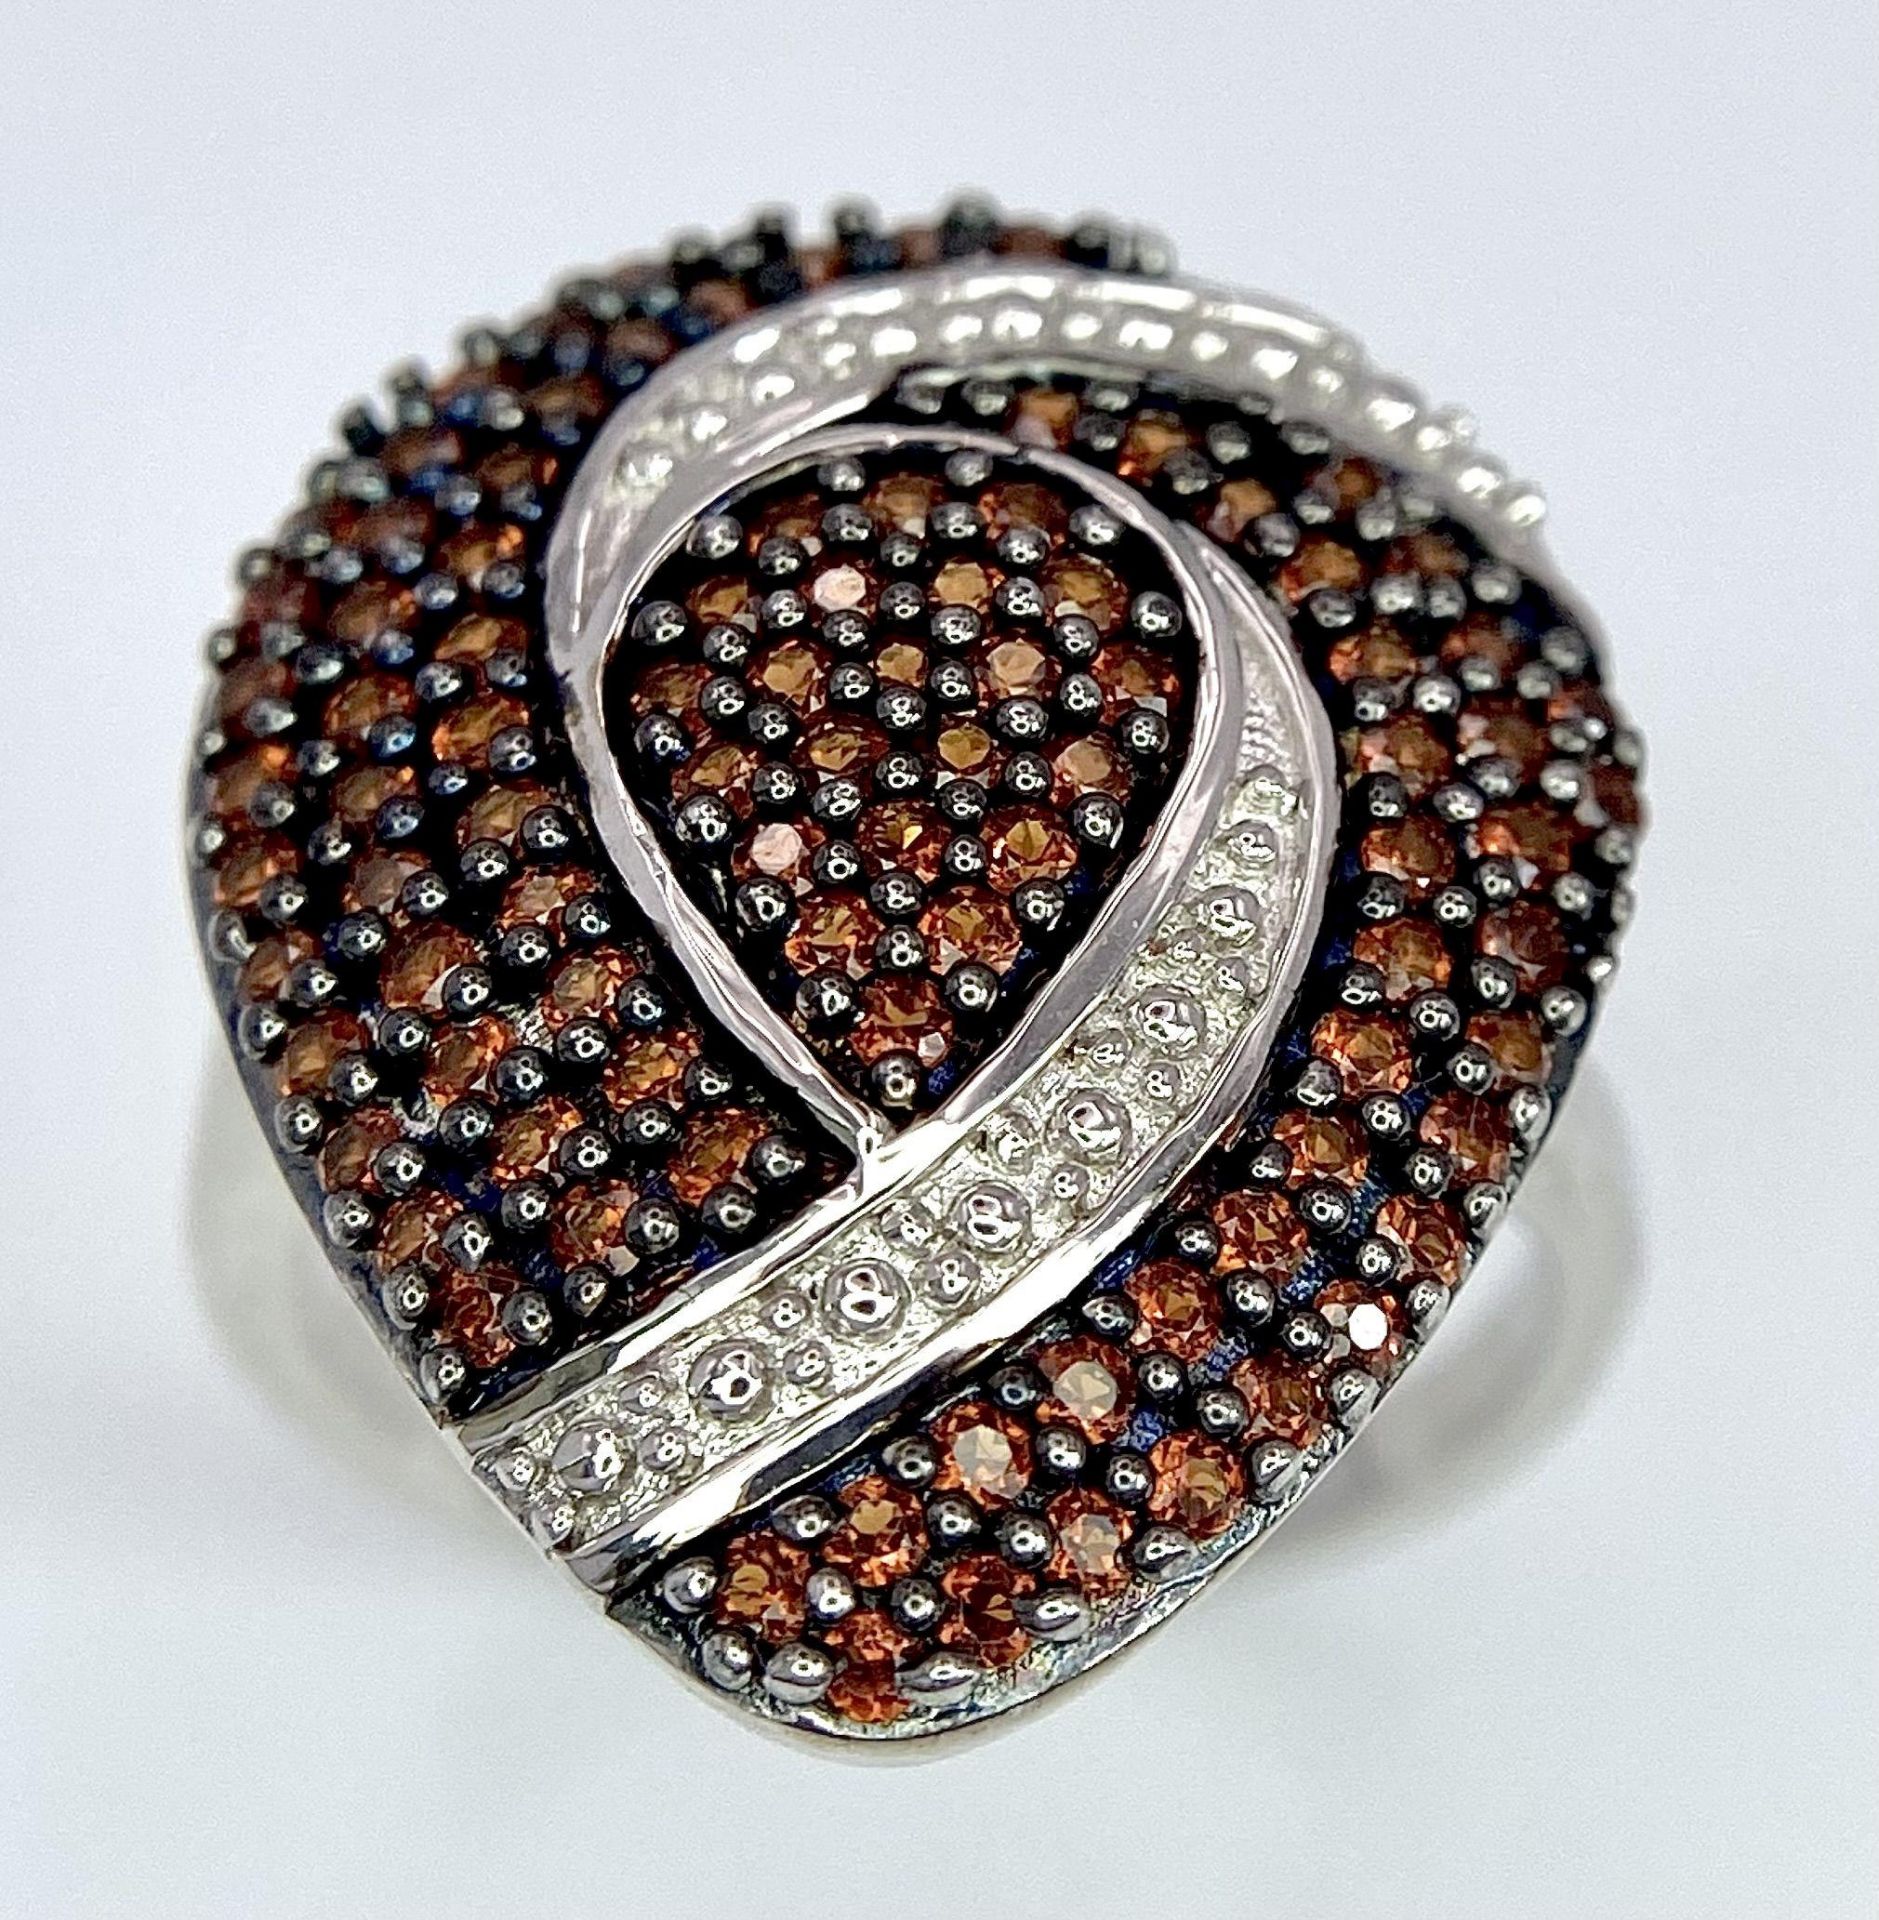 A Stunning, Unworn, Fully Certified Limited Edition (1 of 50), Sterling Silver and Anthill Garnet - Bild 3 aus 7